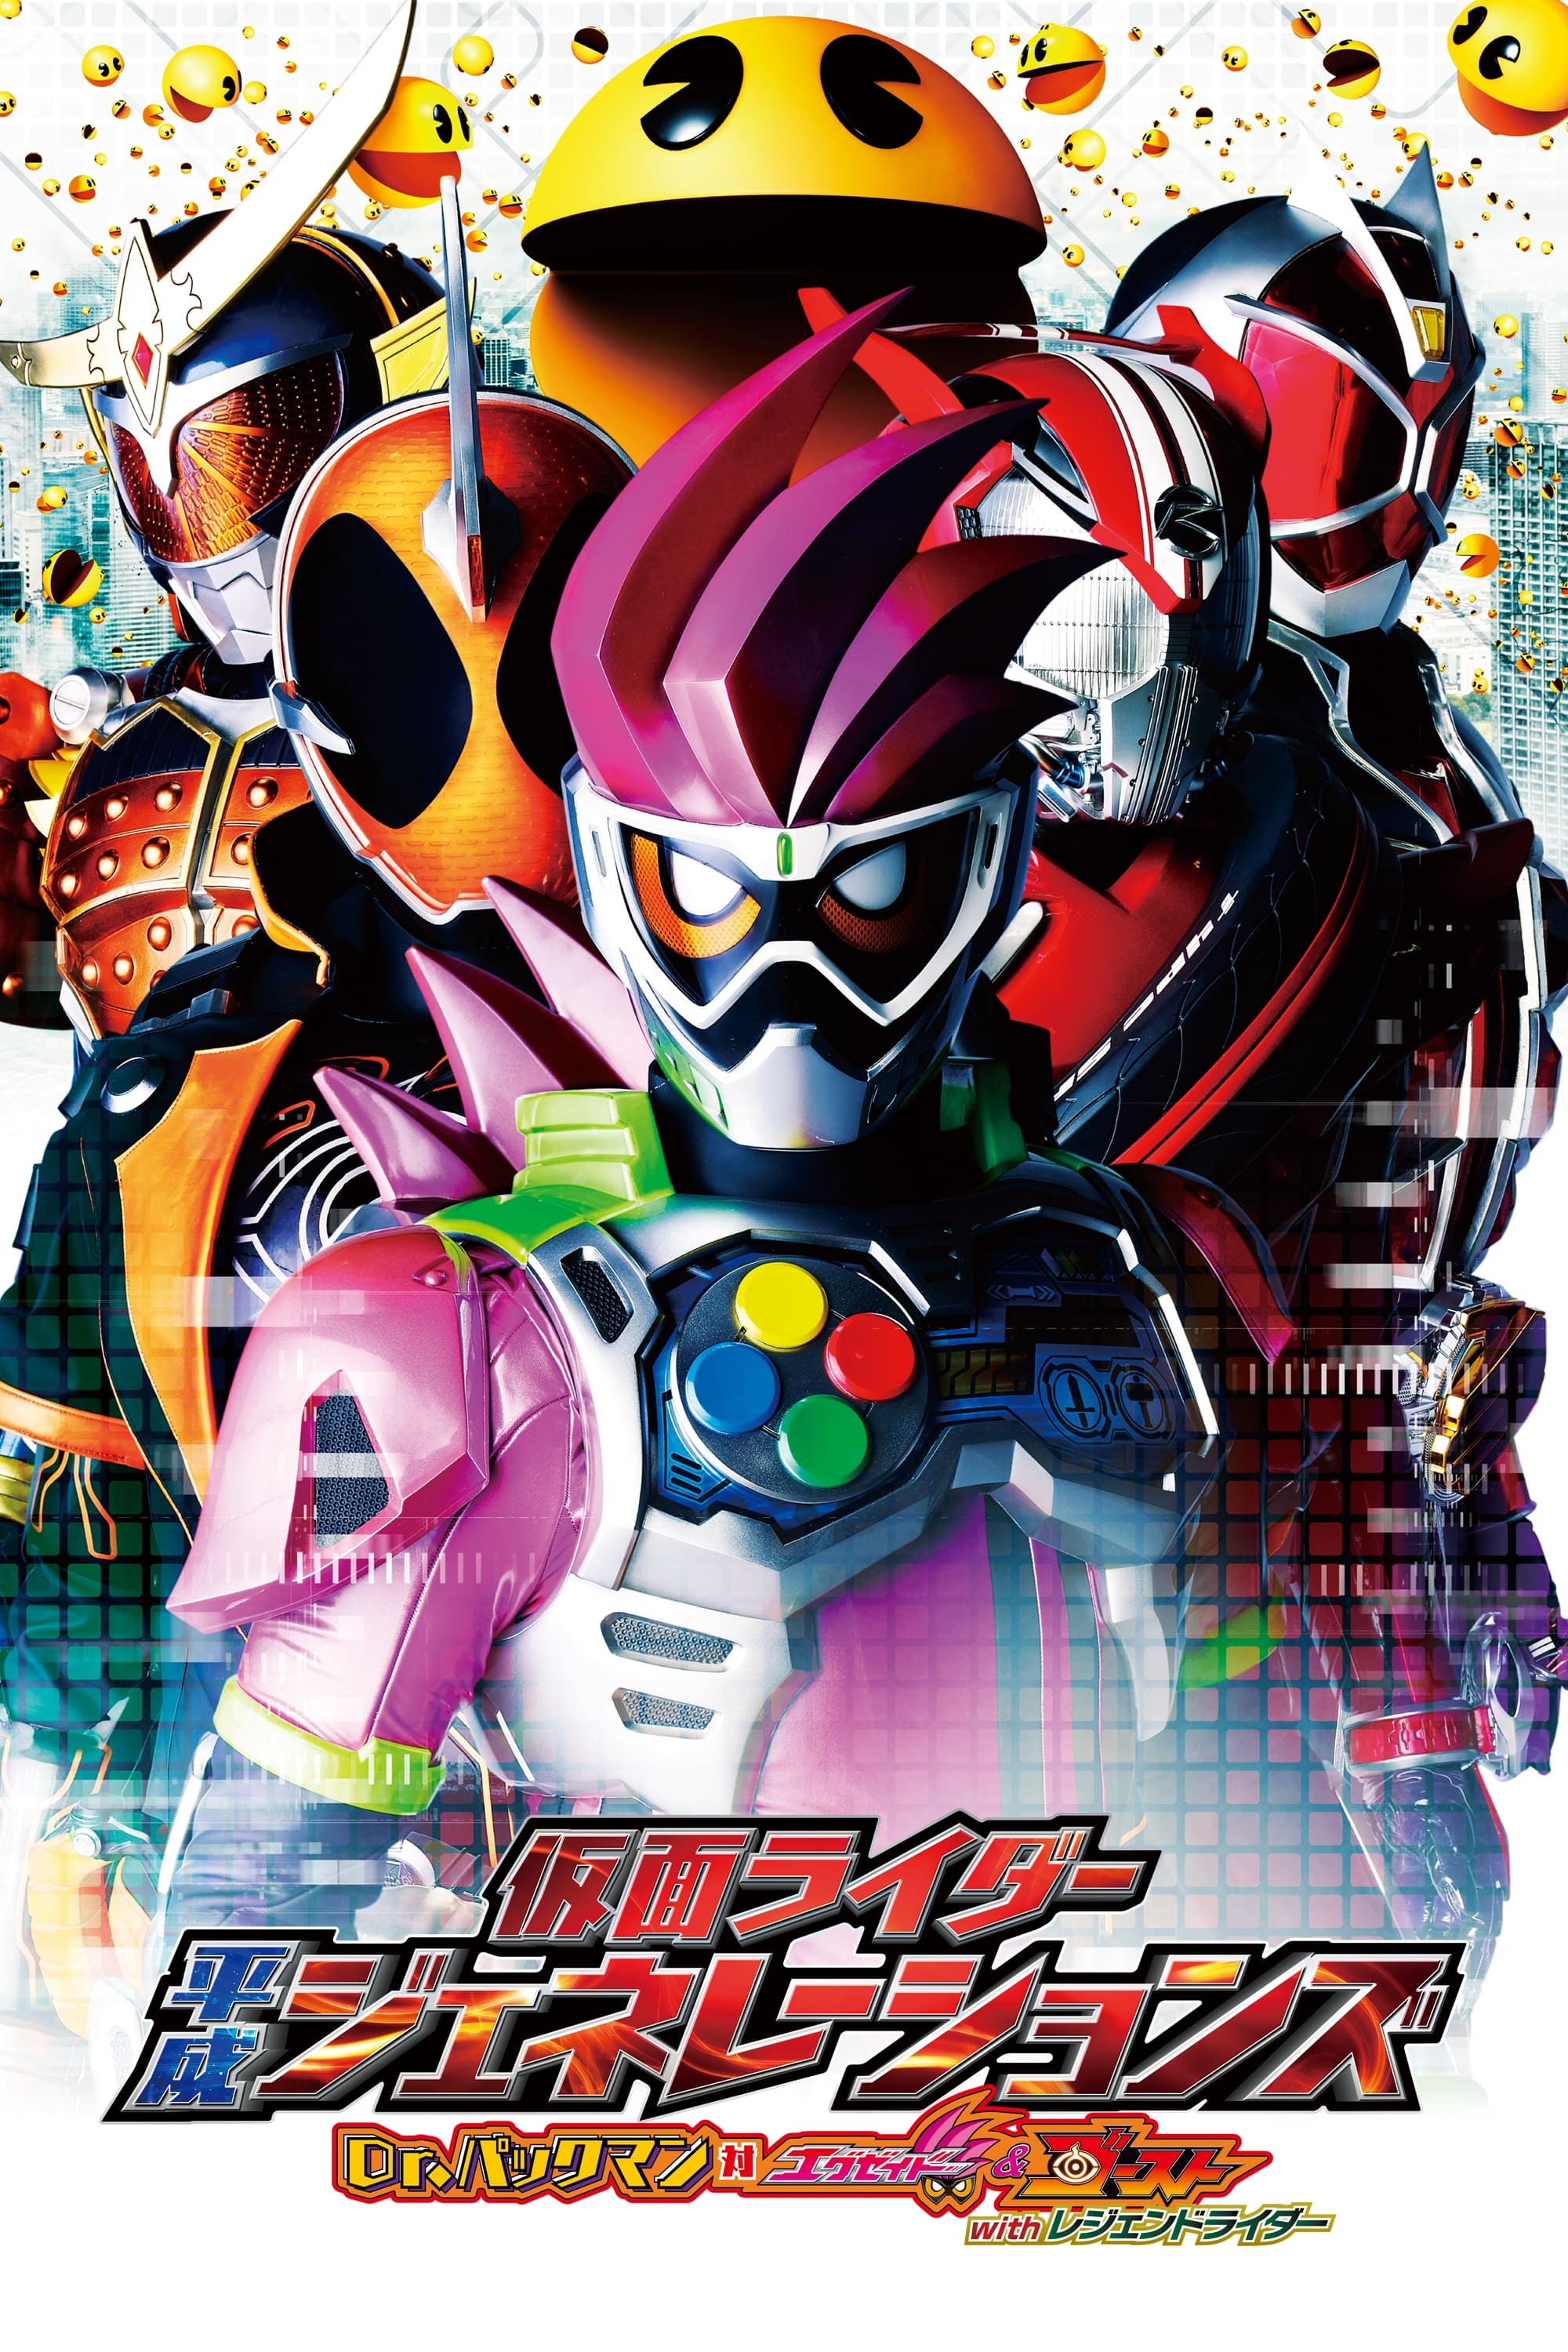 Kamen Rider Heisei Generations: Dr. Pac-Man vs. Ex-Aid & Ghost with Legend Riders (2016)